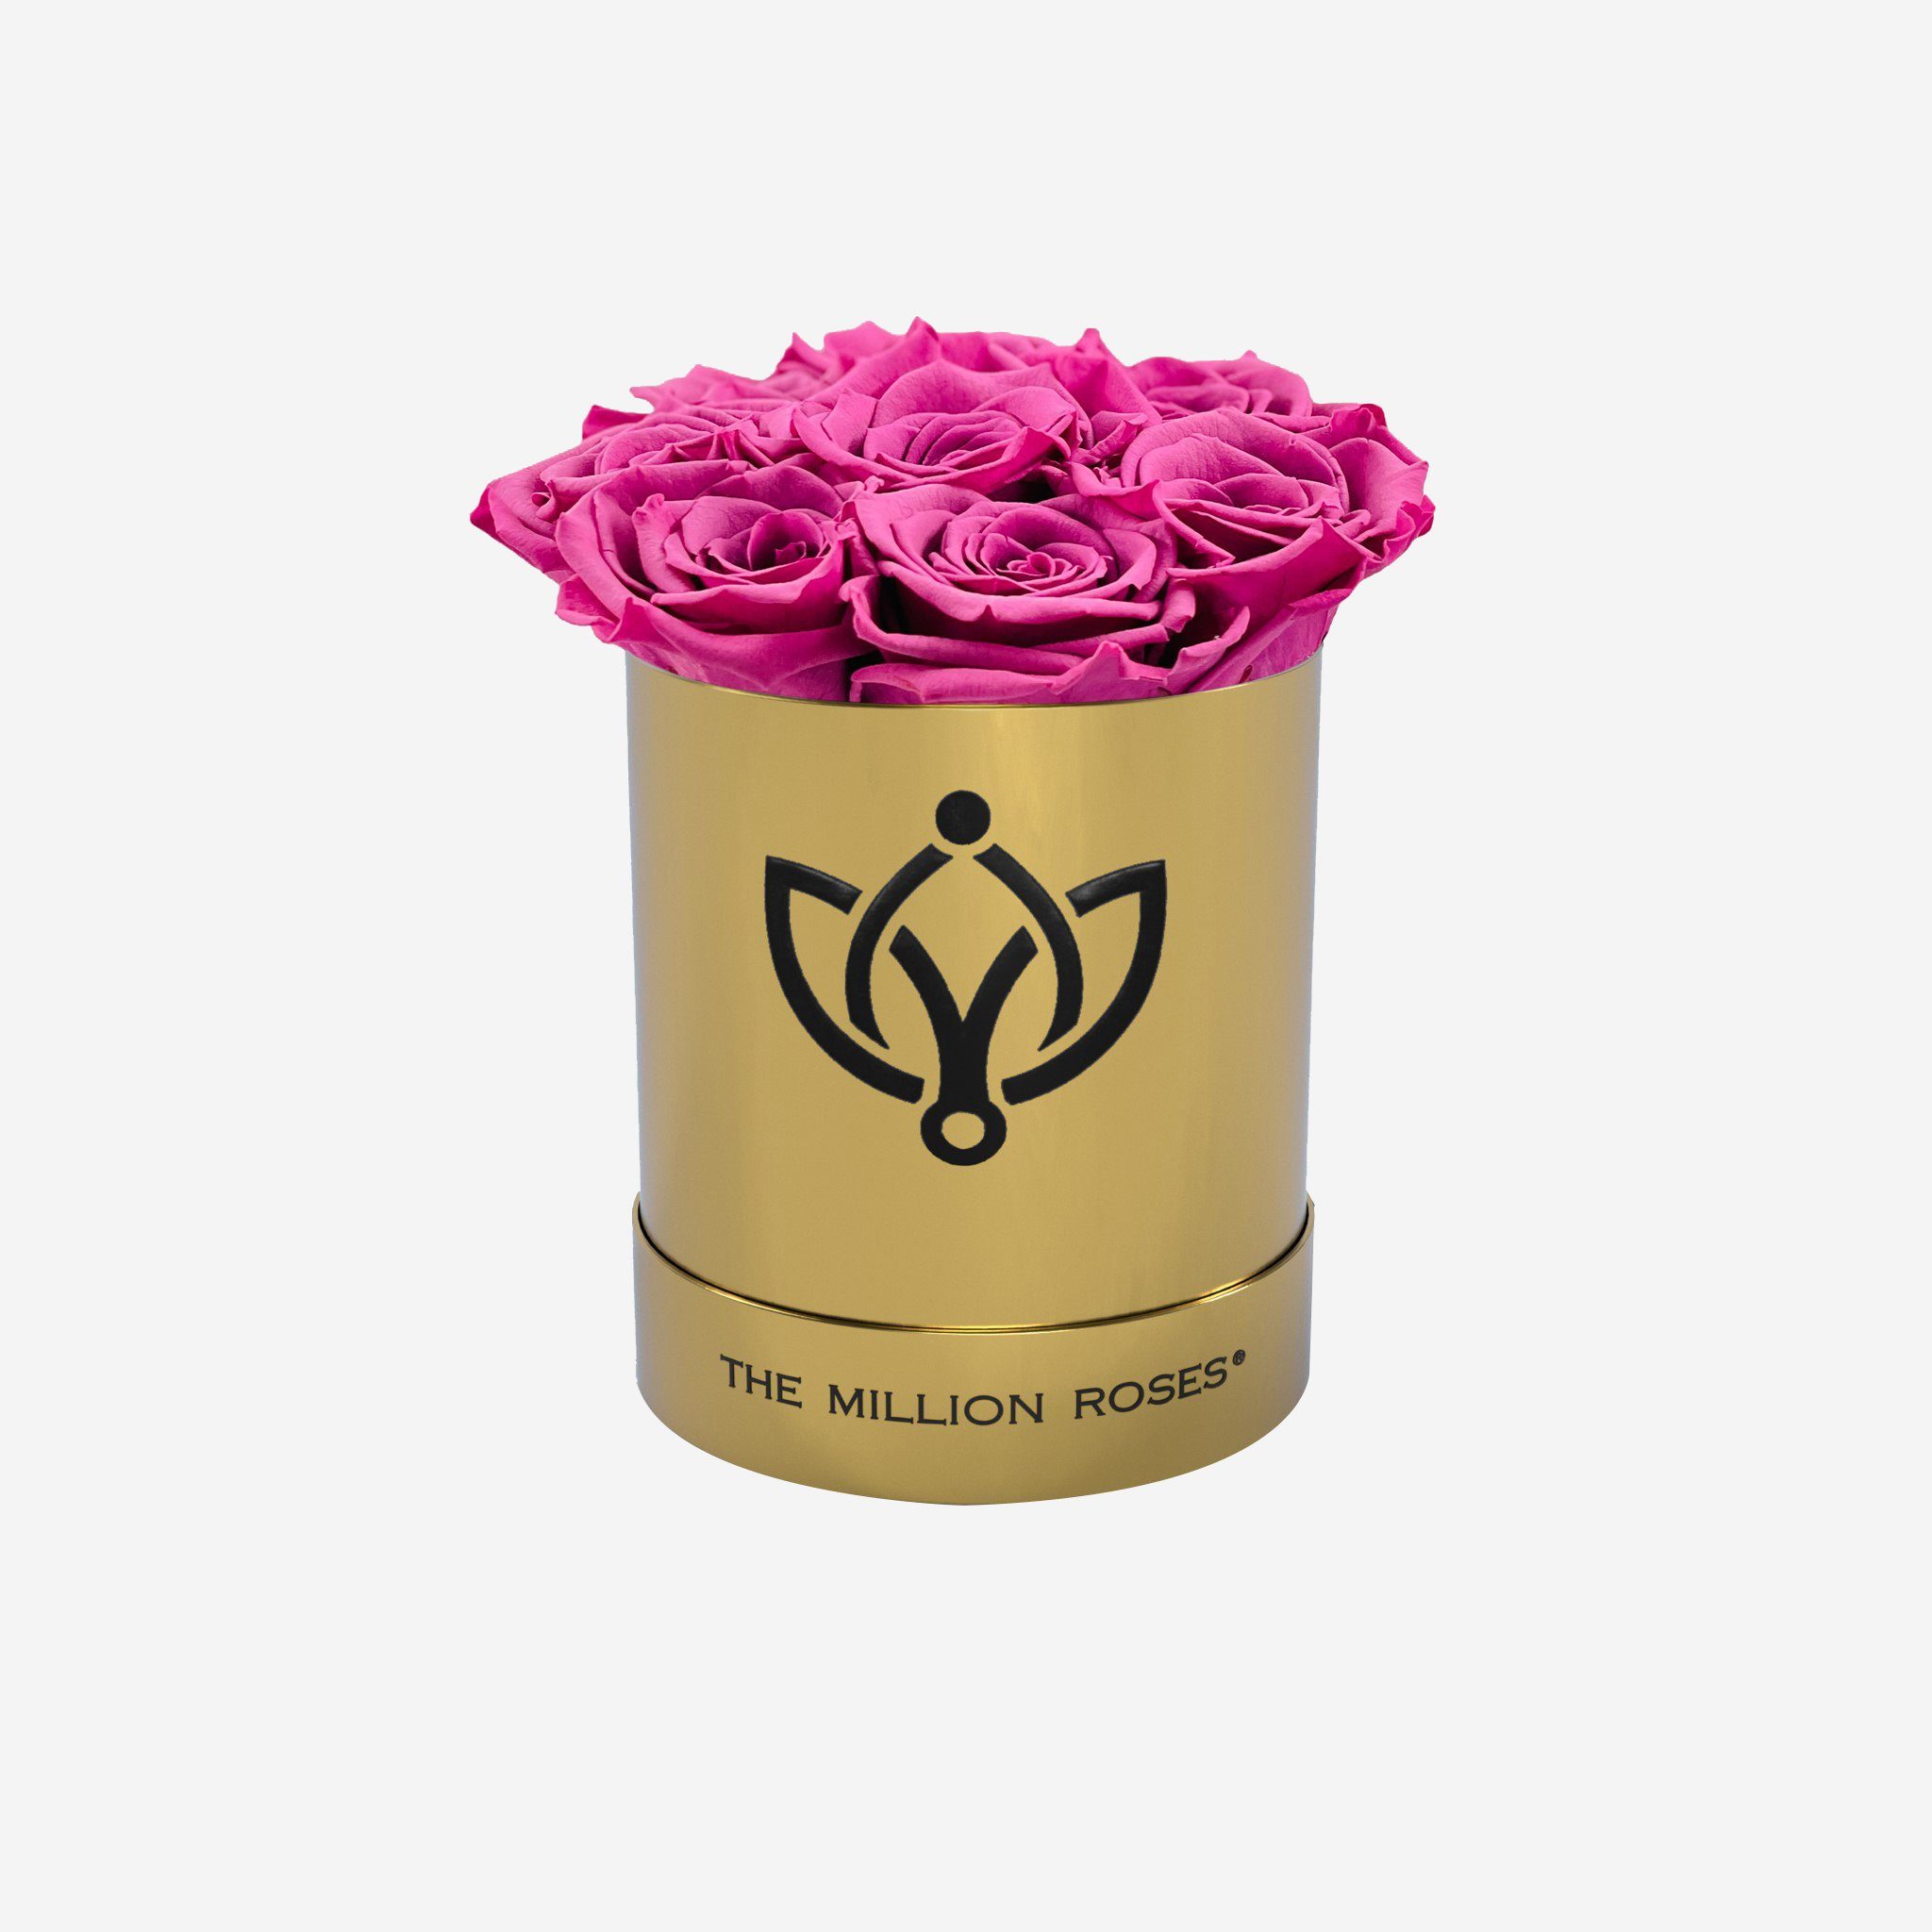 Basic Mirror Gold Box | Orchid Roses - The Million Roses